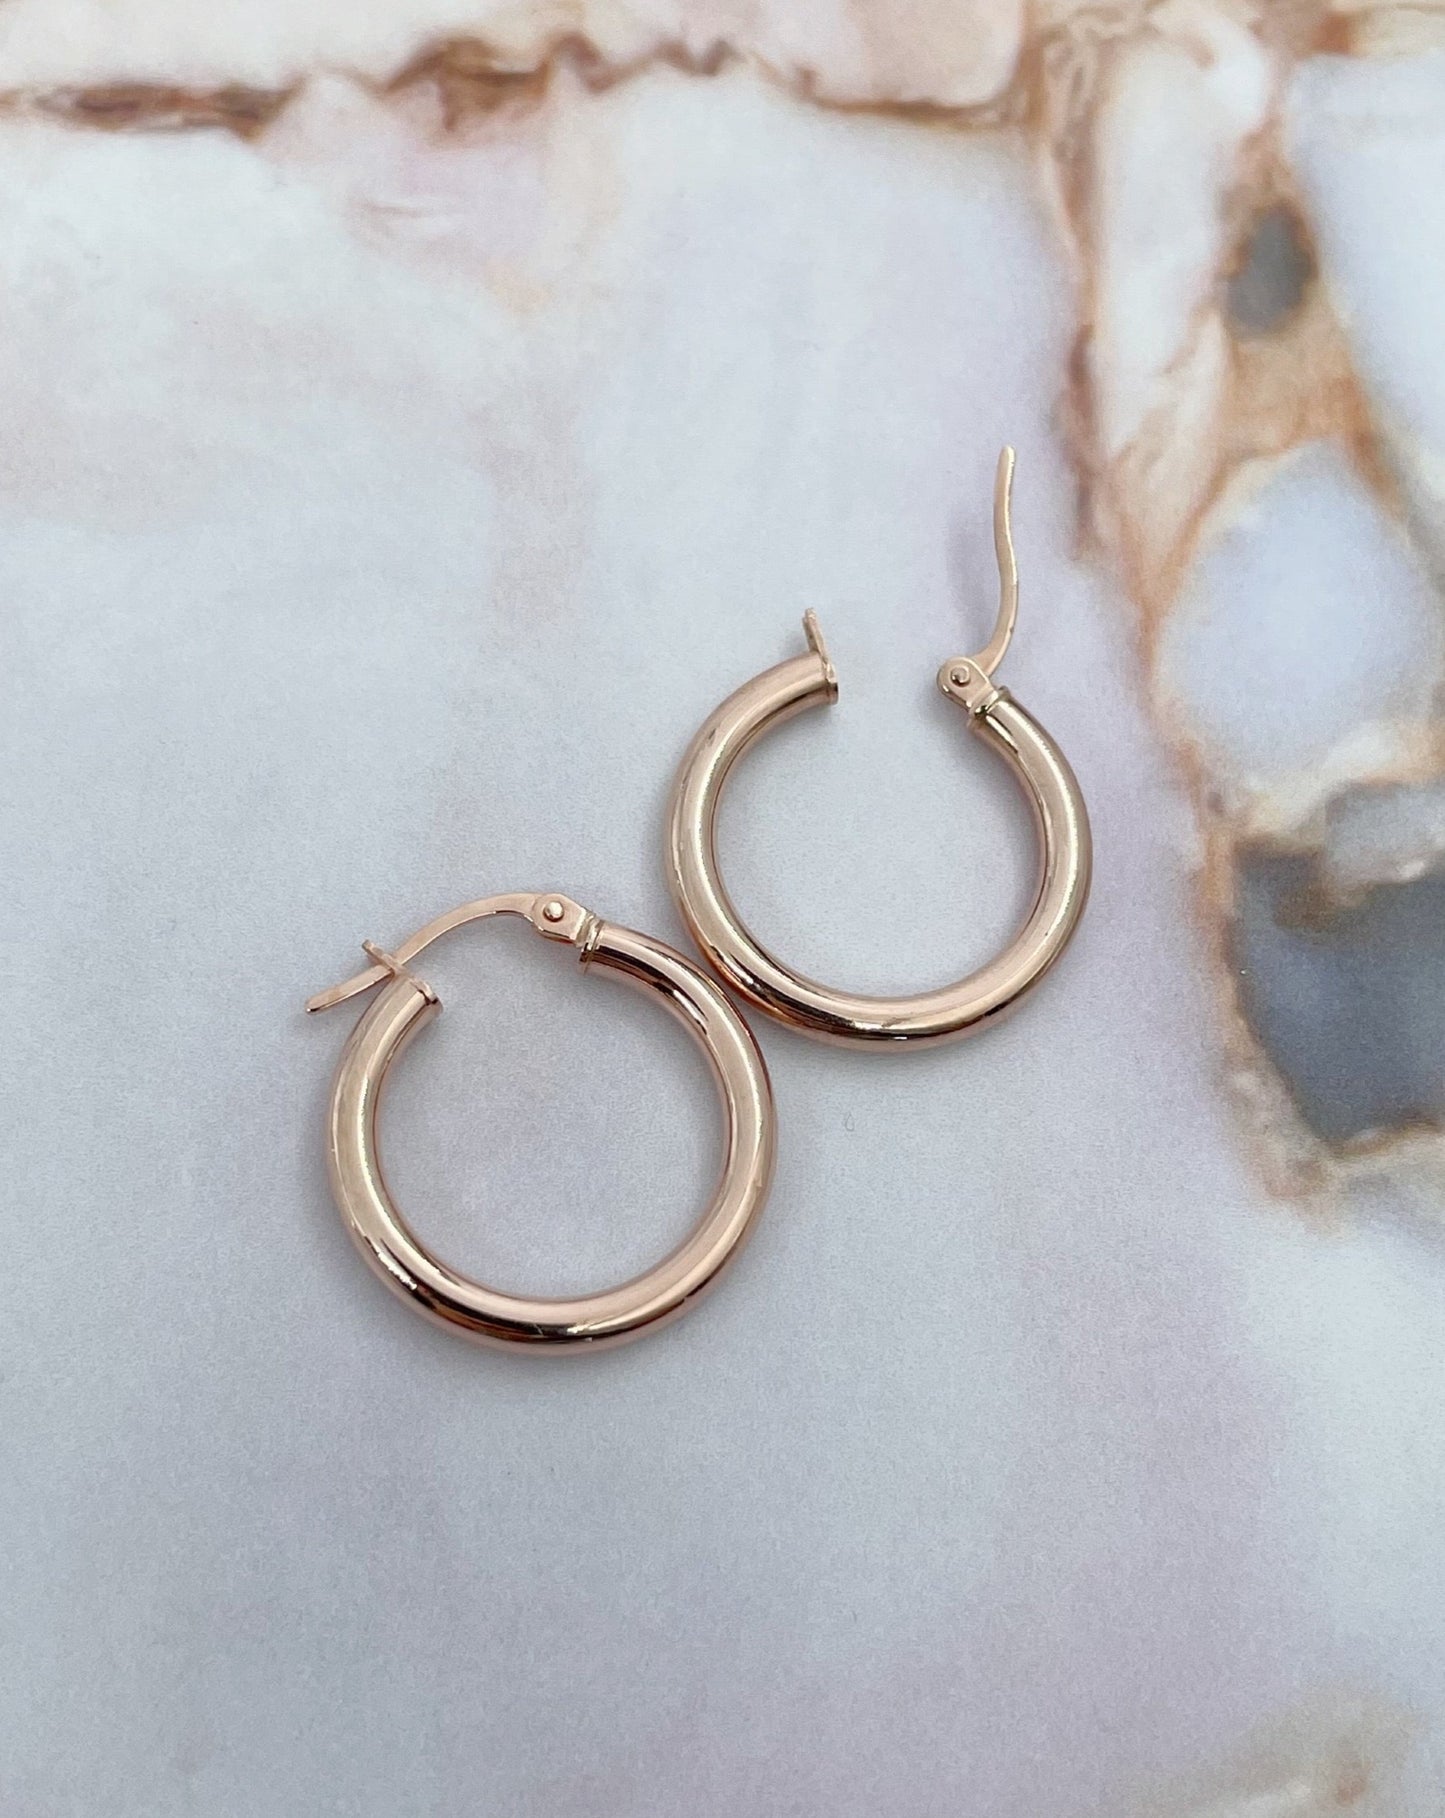 Collective & Co. 9kt Rose Gold Hoops on marble.